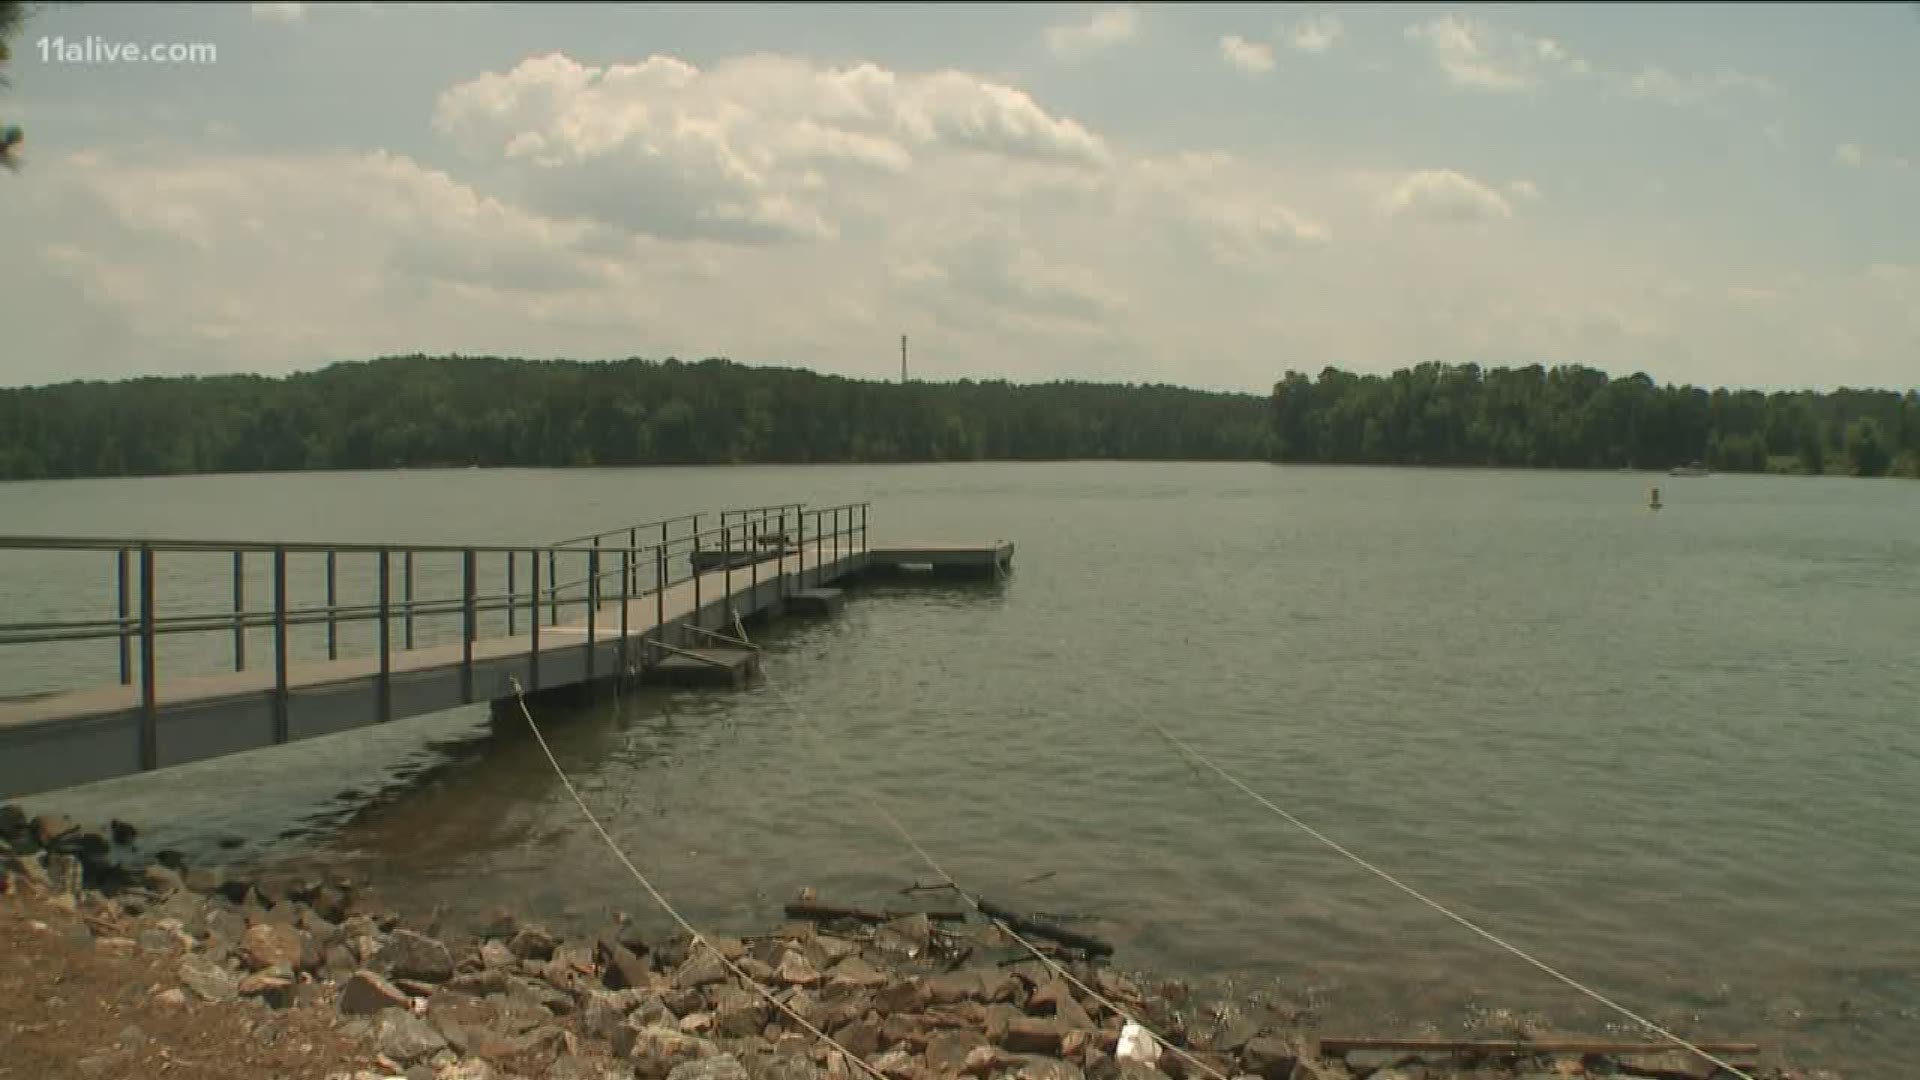 The victim jumped into West Point Lake from his boat to try and rescue his father.